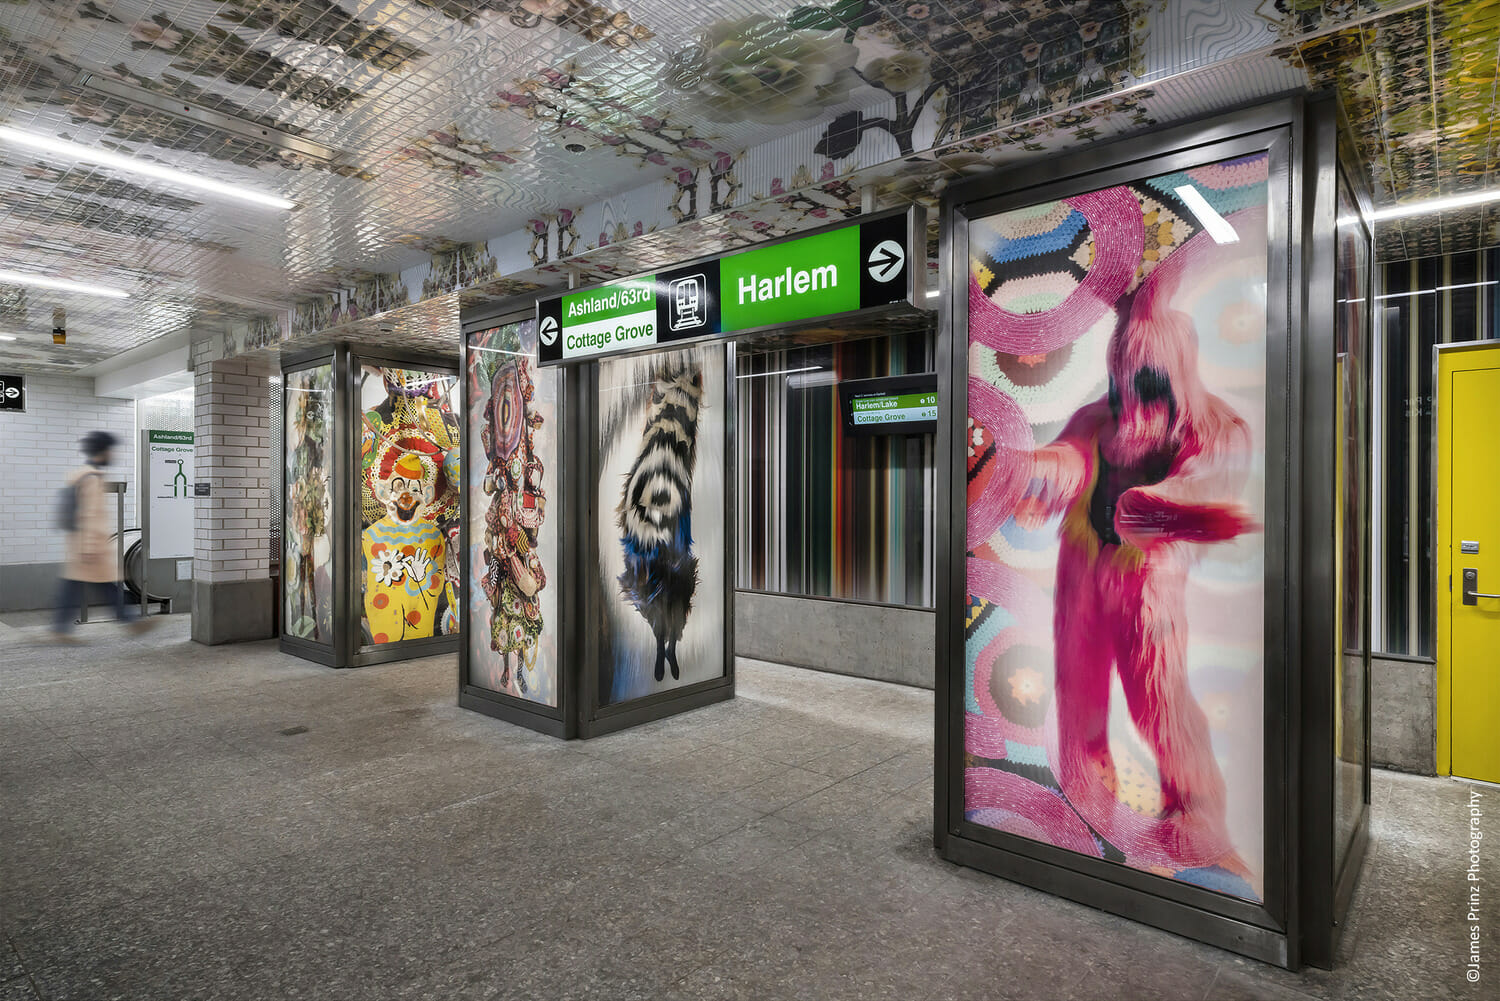 A subway station with colorful paintings on the walls.